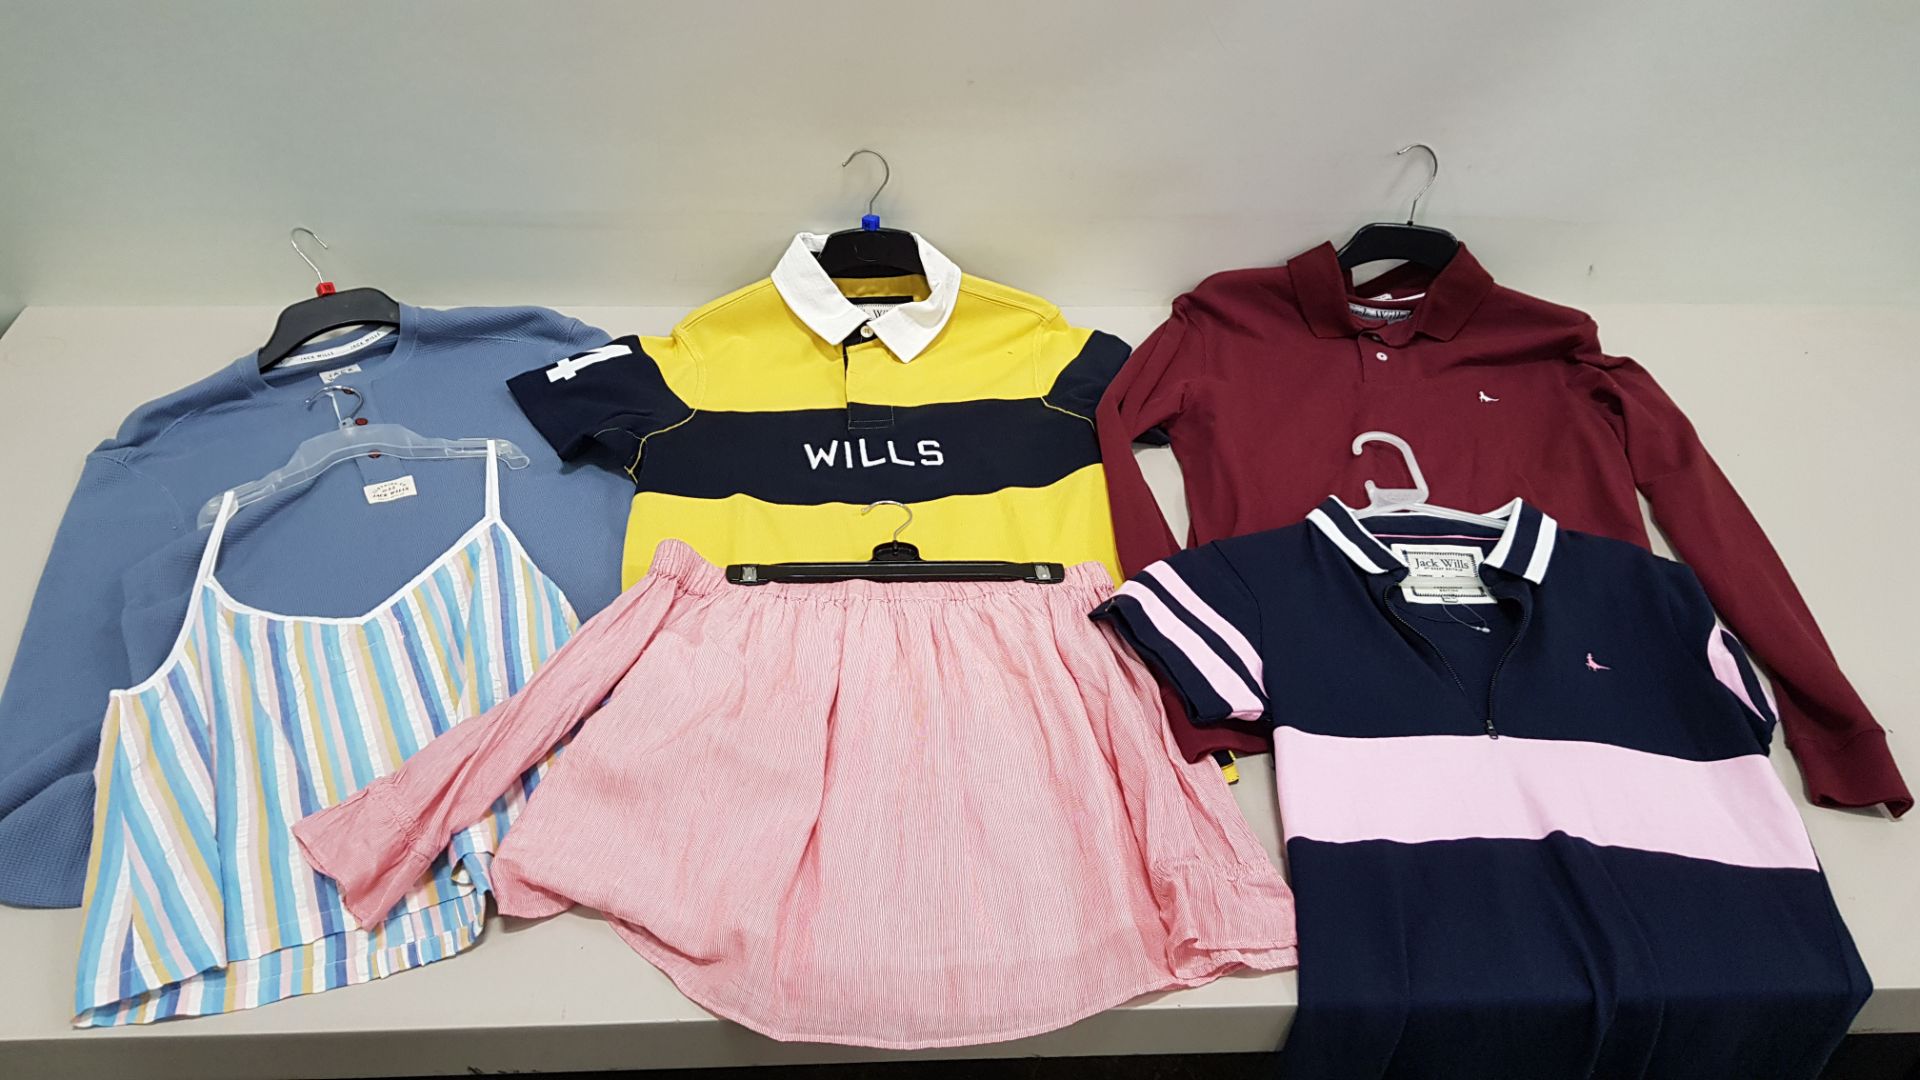 30 PIECE MIXED JACK WILLS MENS CLOTHING LOT CONTAINING TOPS, JUMPERS, POLO SHIRTS AND VESTS ETC